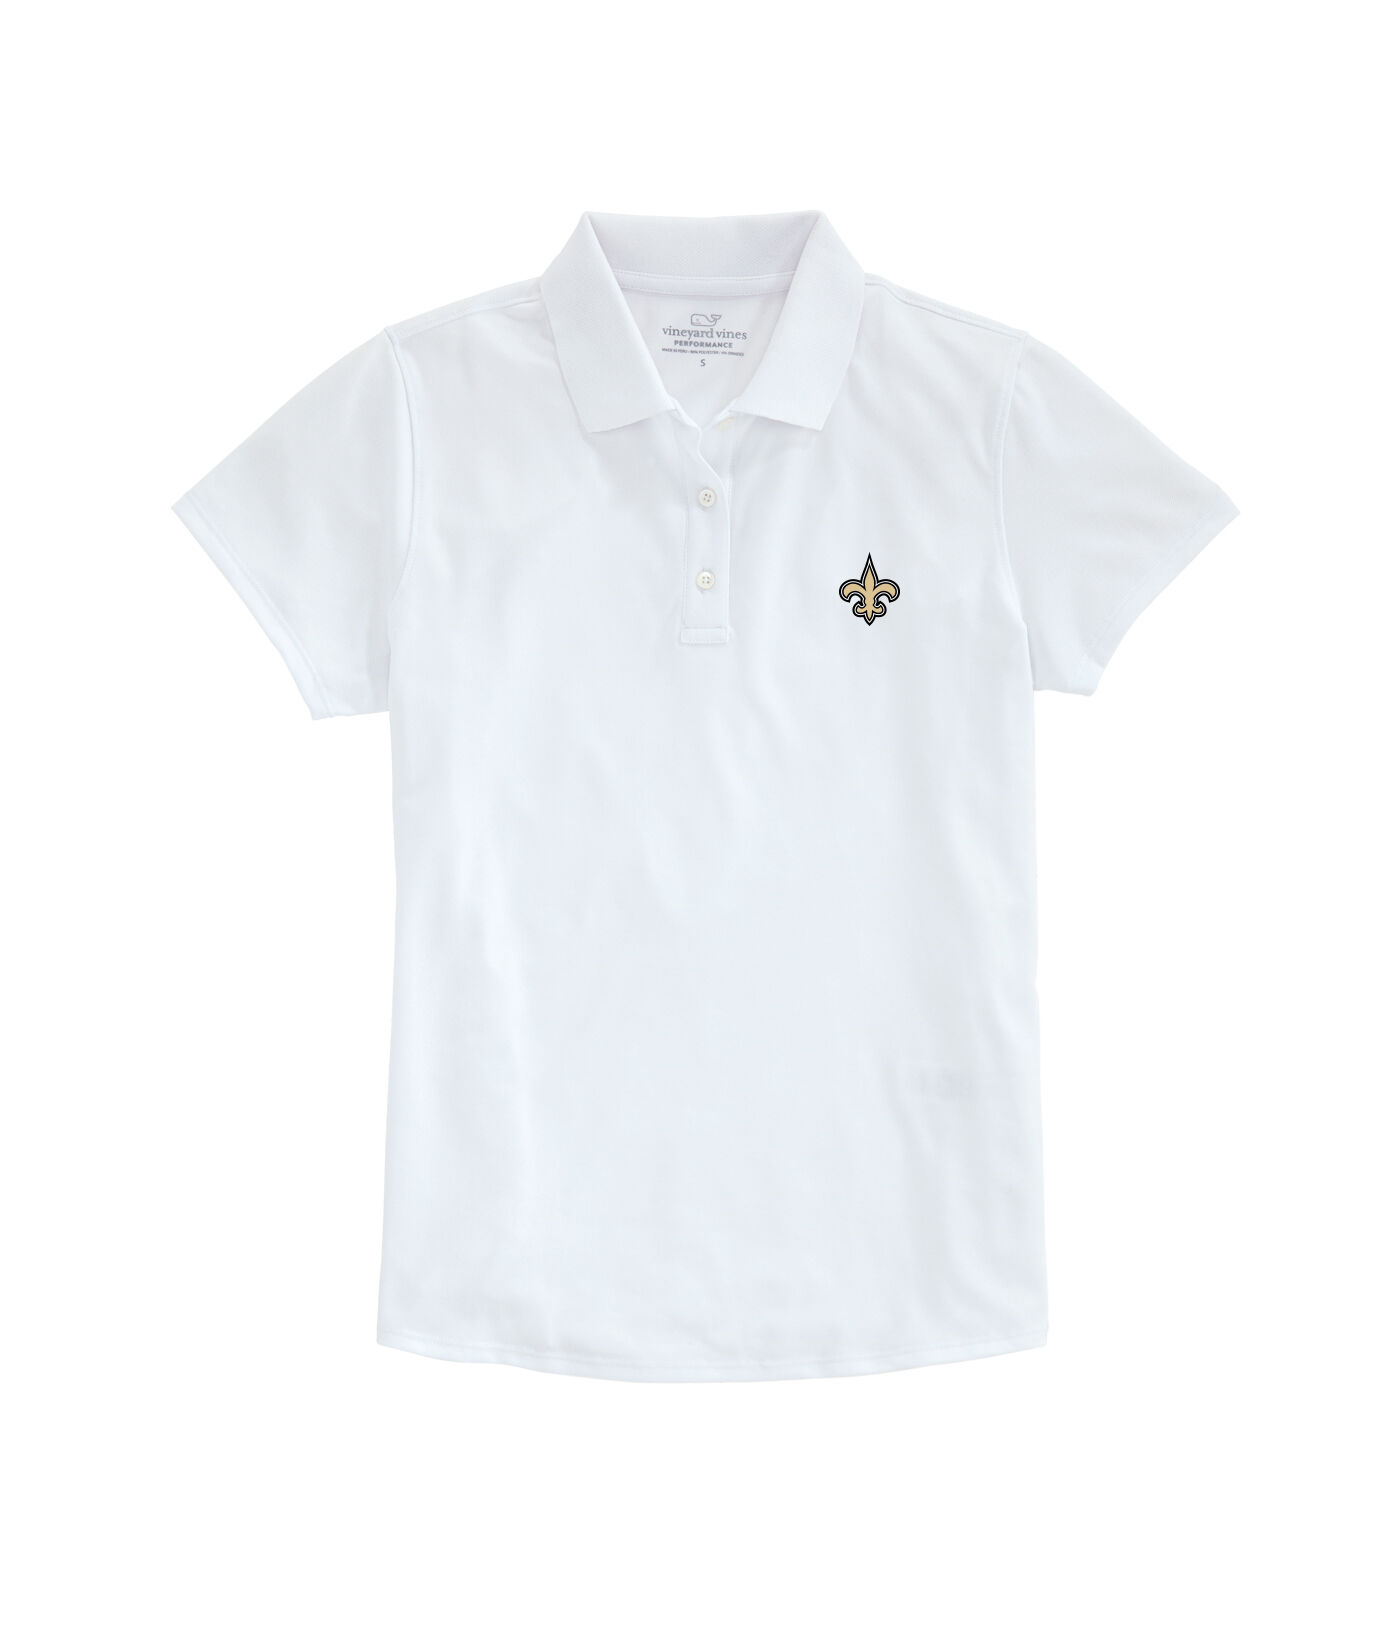 new orleans saints collared shirts